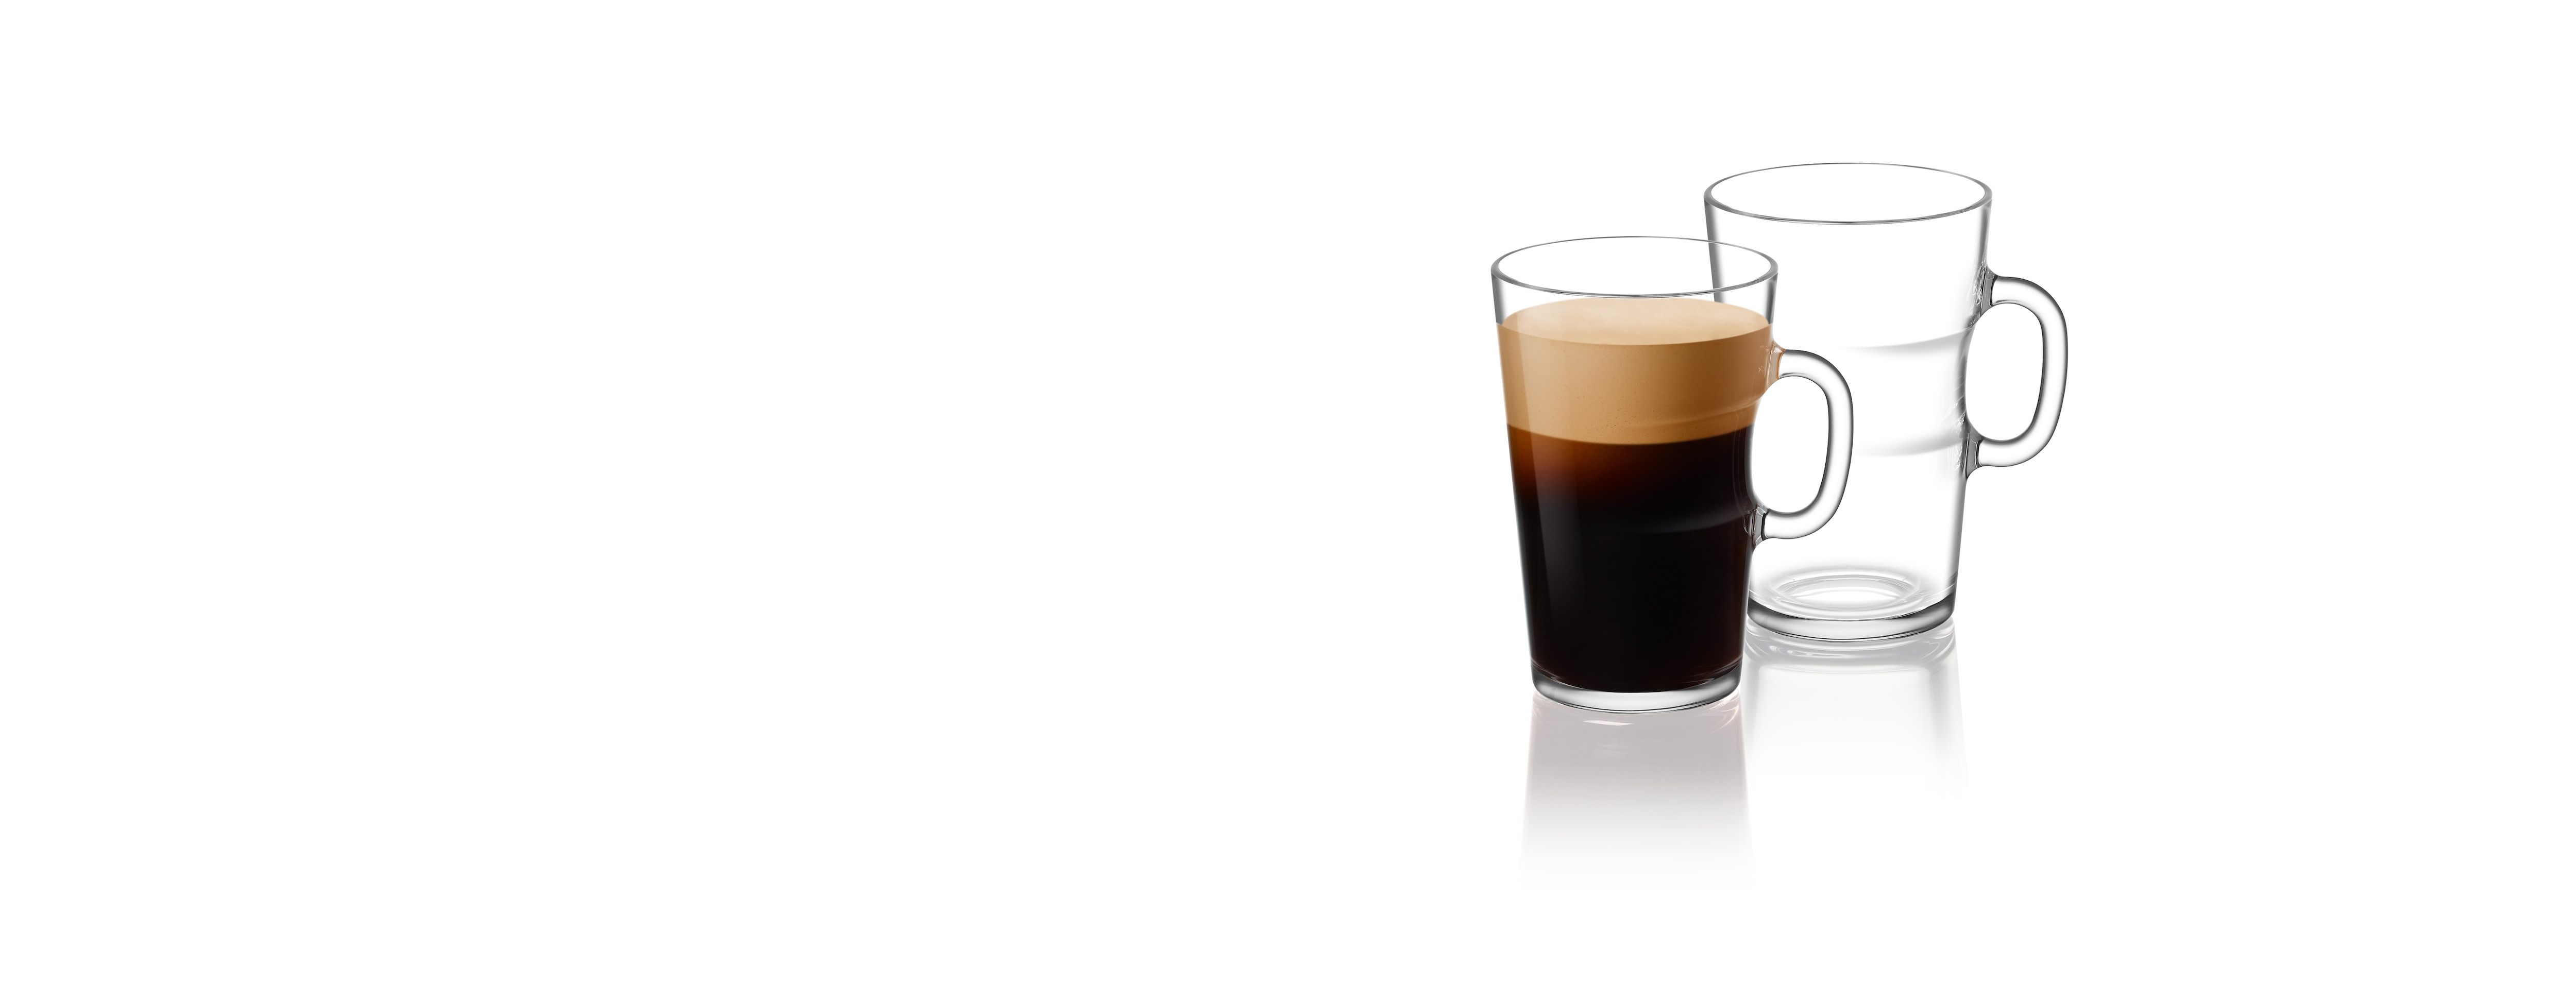 Nespresso Glass Cup : Page 11 : Target